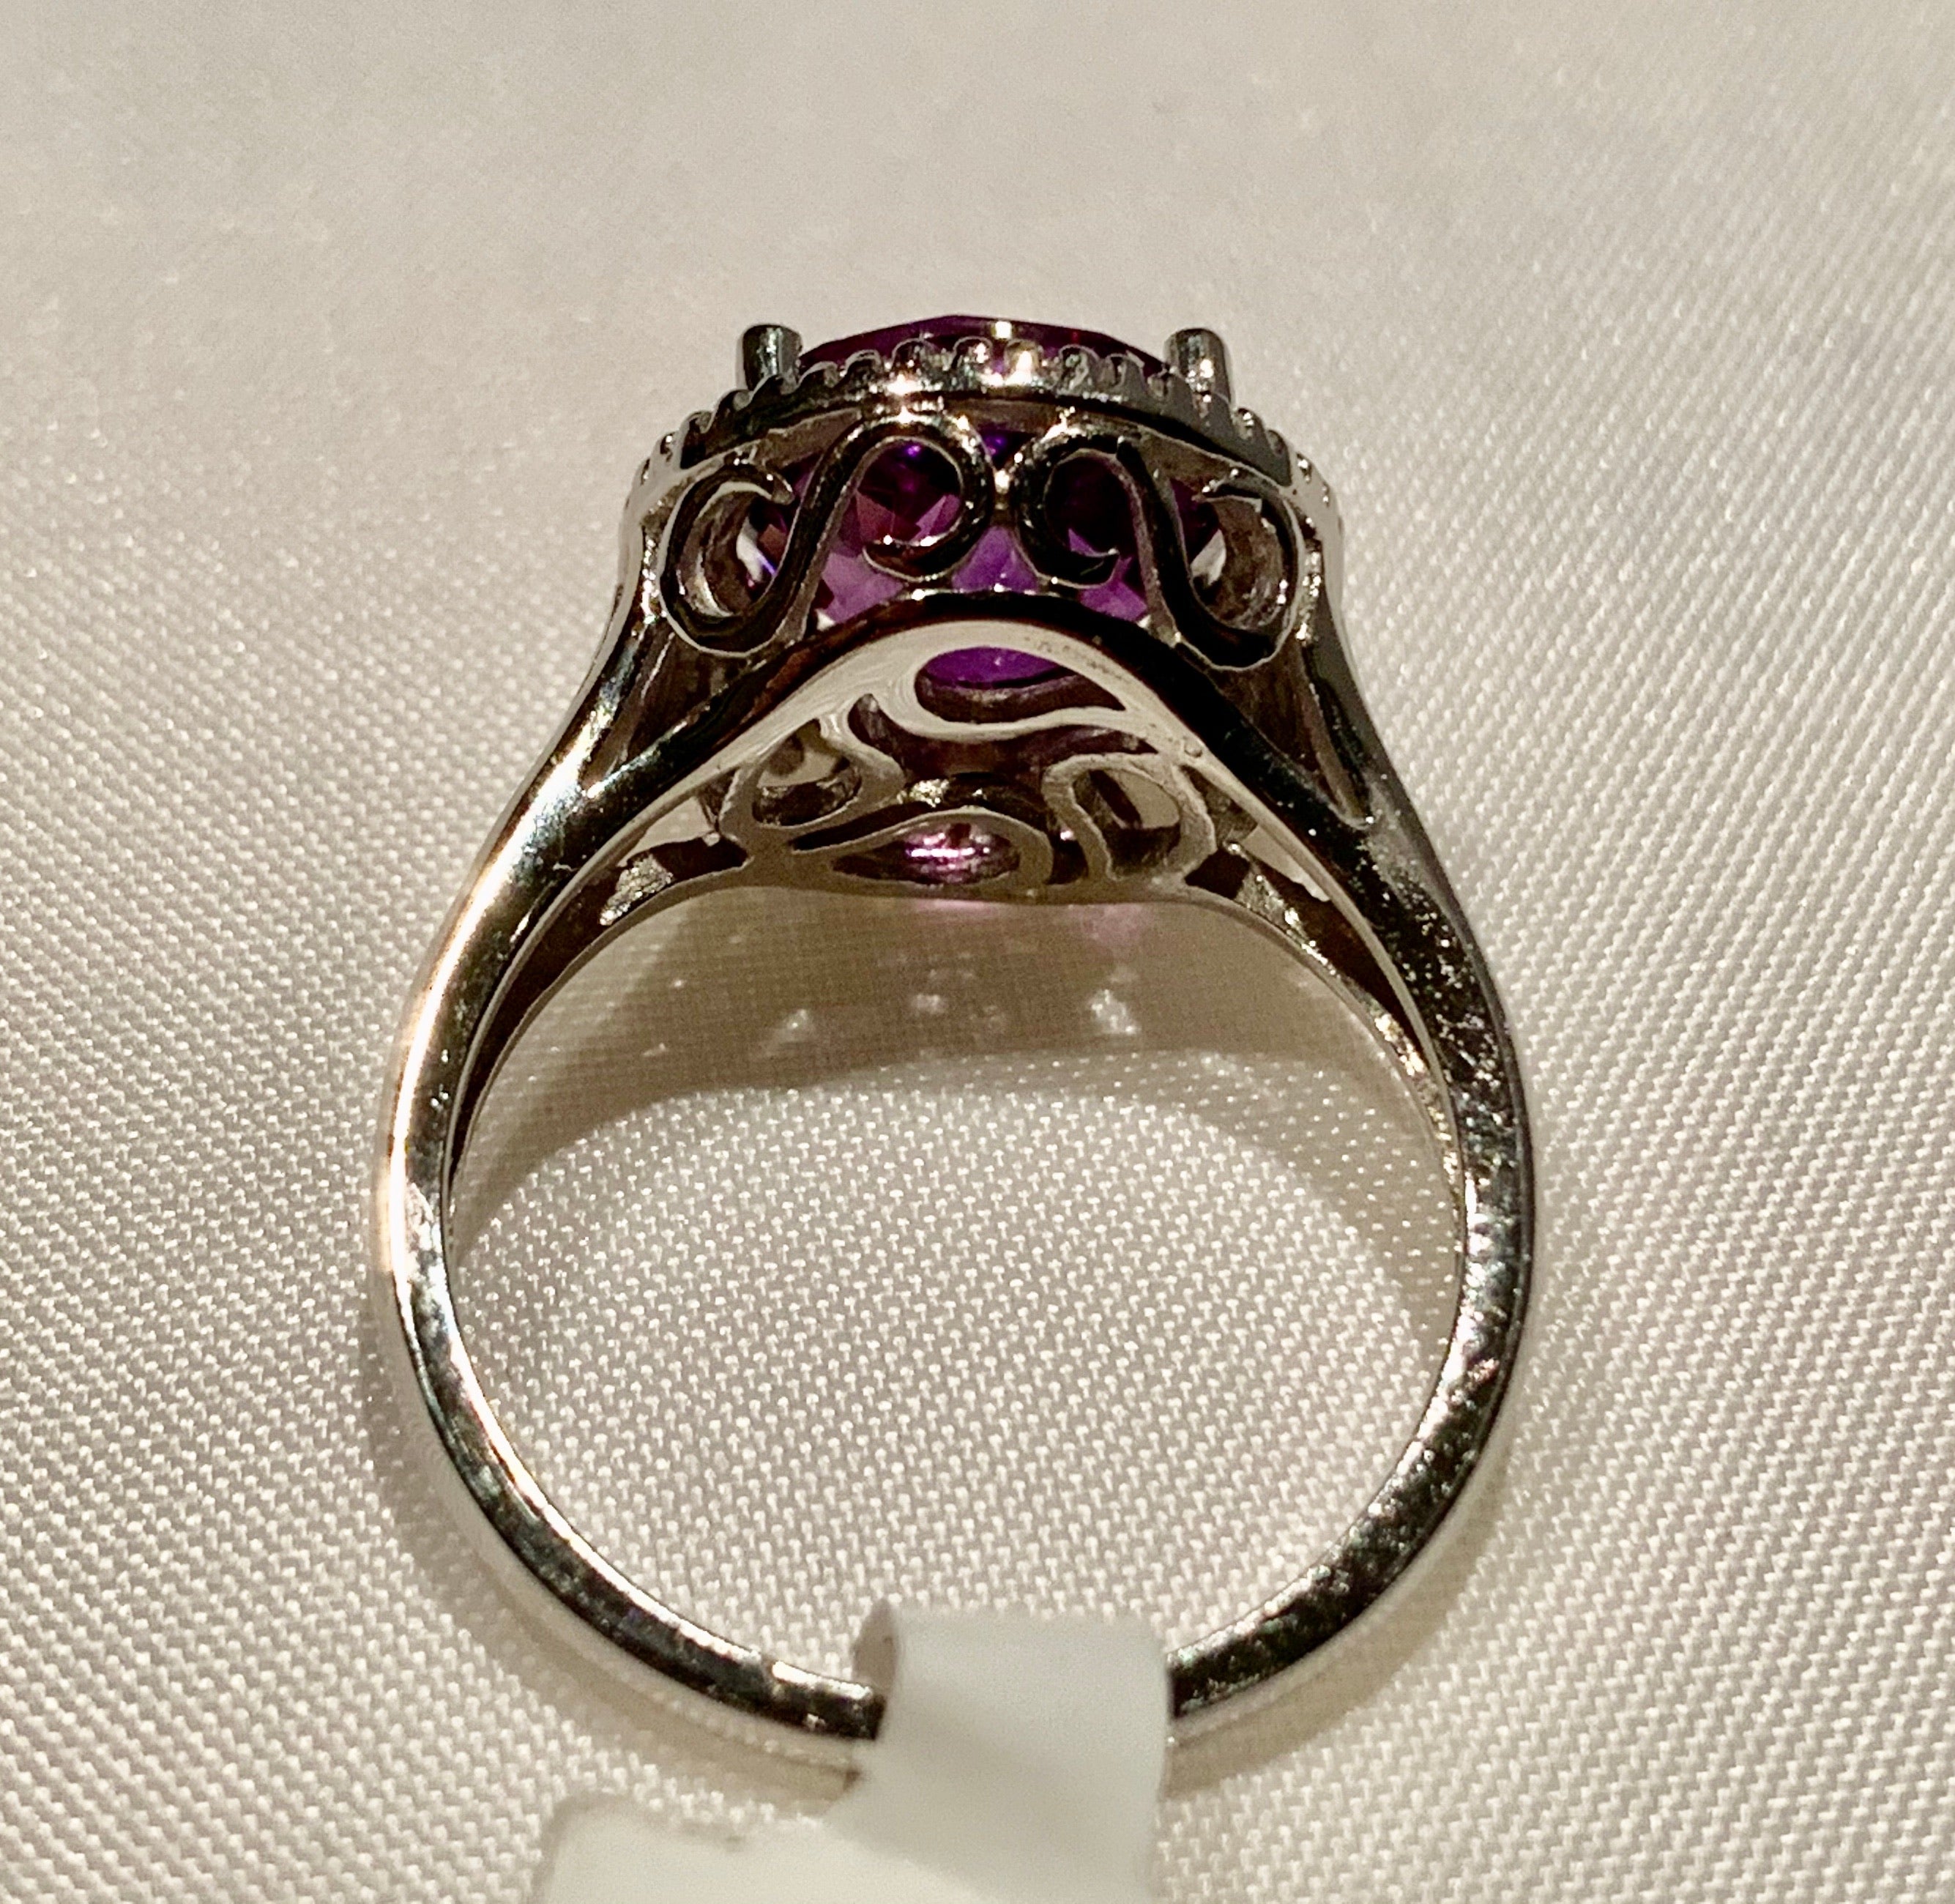 14K WHITE GOLD AMETHYST AND DIAMOND RING